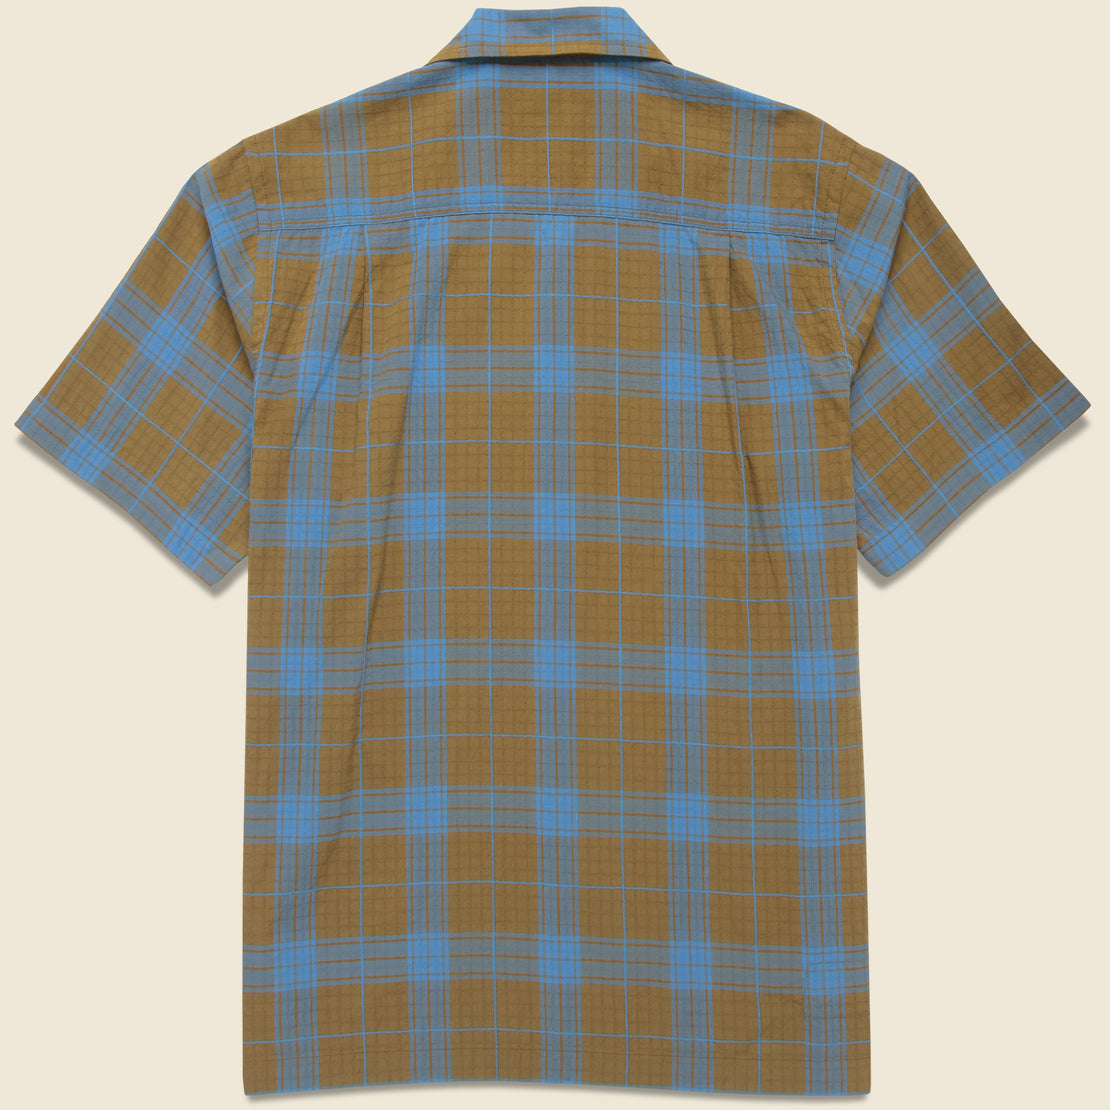 Taki Check Camp Shirt - Seasand - Universal Works - STAG Provisions - Tops - S/S Woven - Plaid